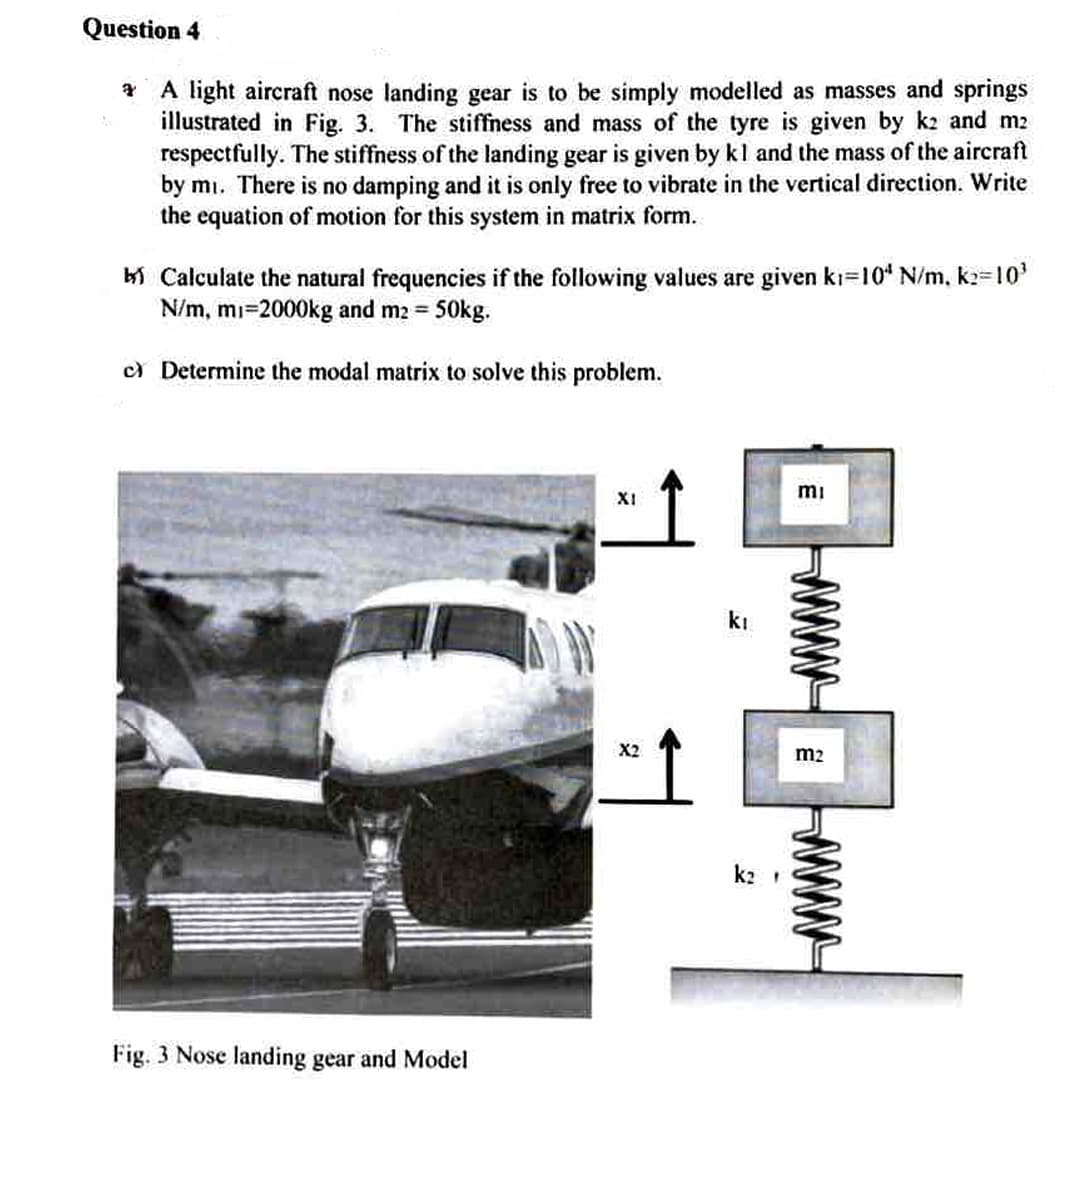 Question 4
A light aircraft nose landing gear is to be simply modelled as masses and springs
illustrated in Fig. 3. The stiffness and mass of the tyre is given by k2 and m2
respectfully. The stiffness of the landing gear is given by kl and the mass of the aircraft
by mi. There is no damping and it is only free to vibrate in the vertical direction. Write
the equation of motion for this system in matrix form.
Calculate the natural frequencies if the following values are given kı=10* N/m, k:=10³
N/m, mi-2000kg and m2 = 50kg.
c) Determine the modal matrix to solve this problem.
Fig. 3 Nose landing gear and Model
XI
X2
kı
k₂
mi
m2